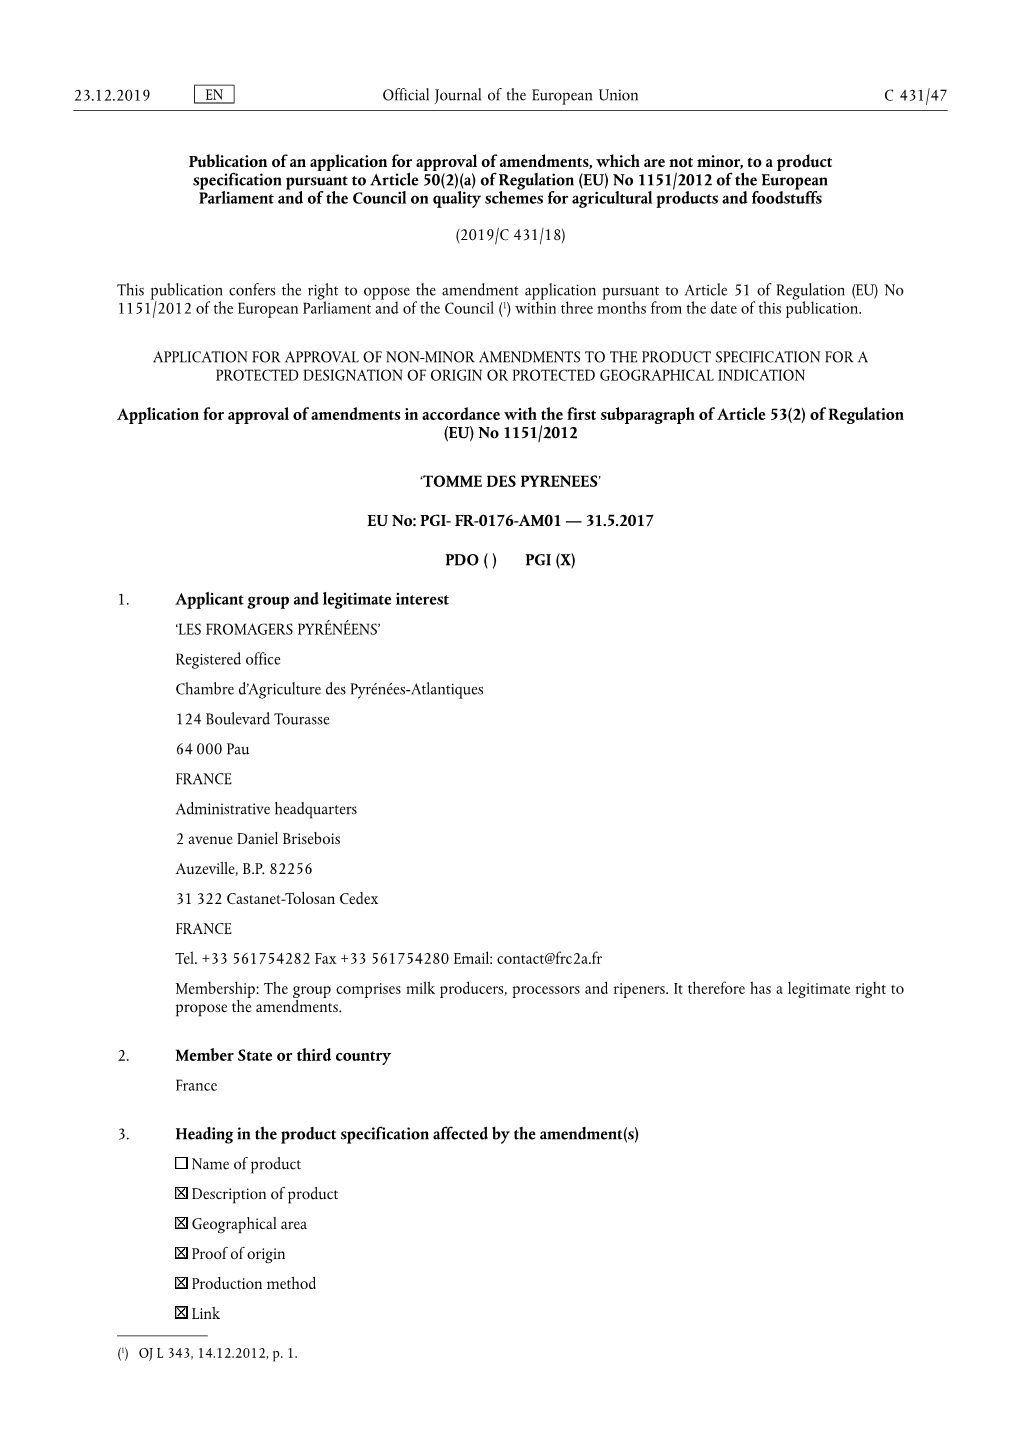 Publication of an Application for Approval of Amendments, Which Are